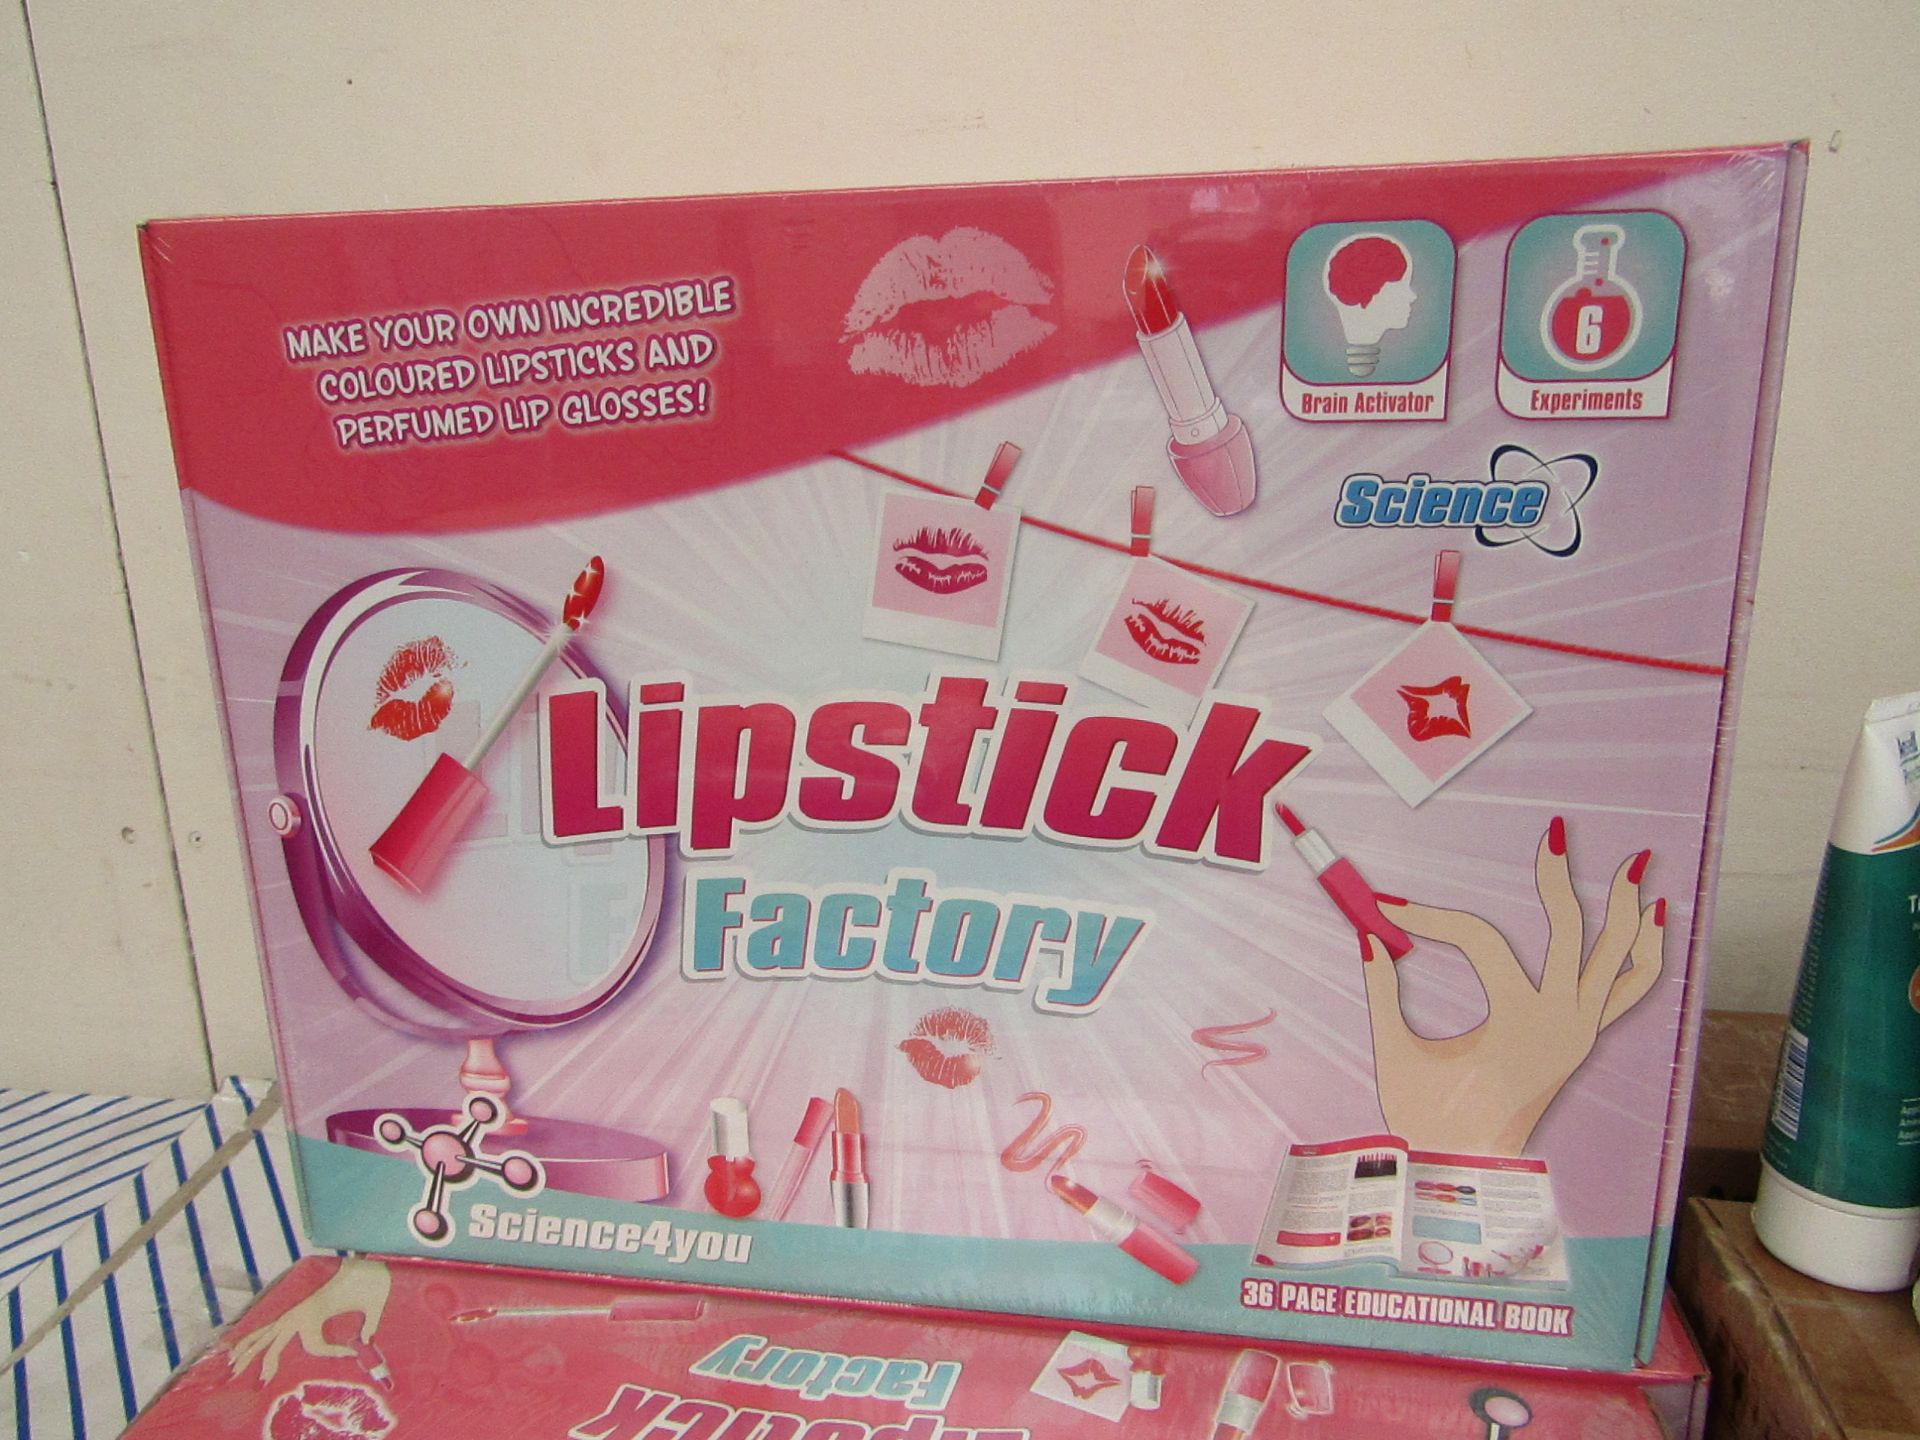 Science 4 You Lipstick Factory. Make your own Lipsticks & Glosses. New In an Sealed Box